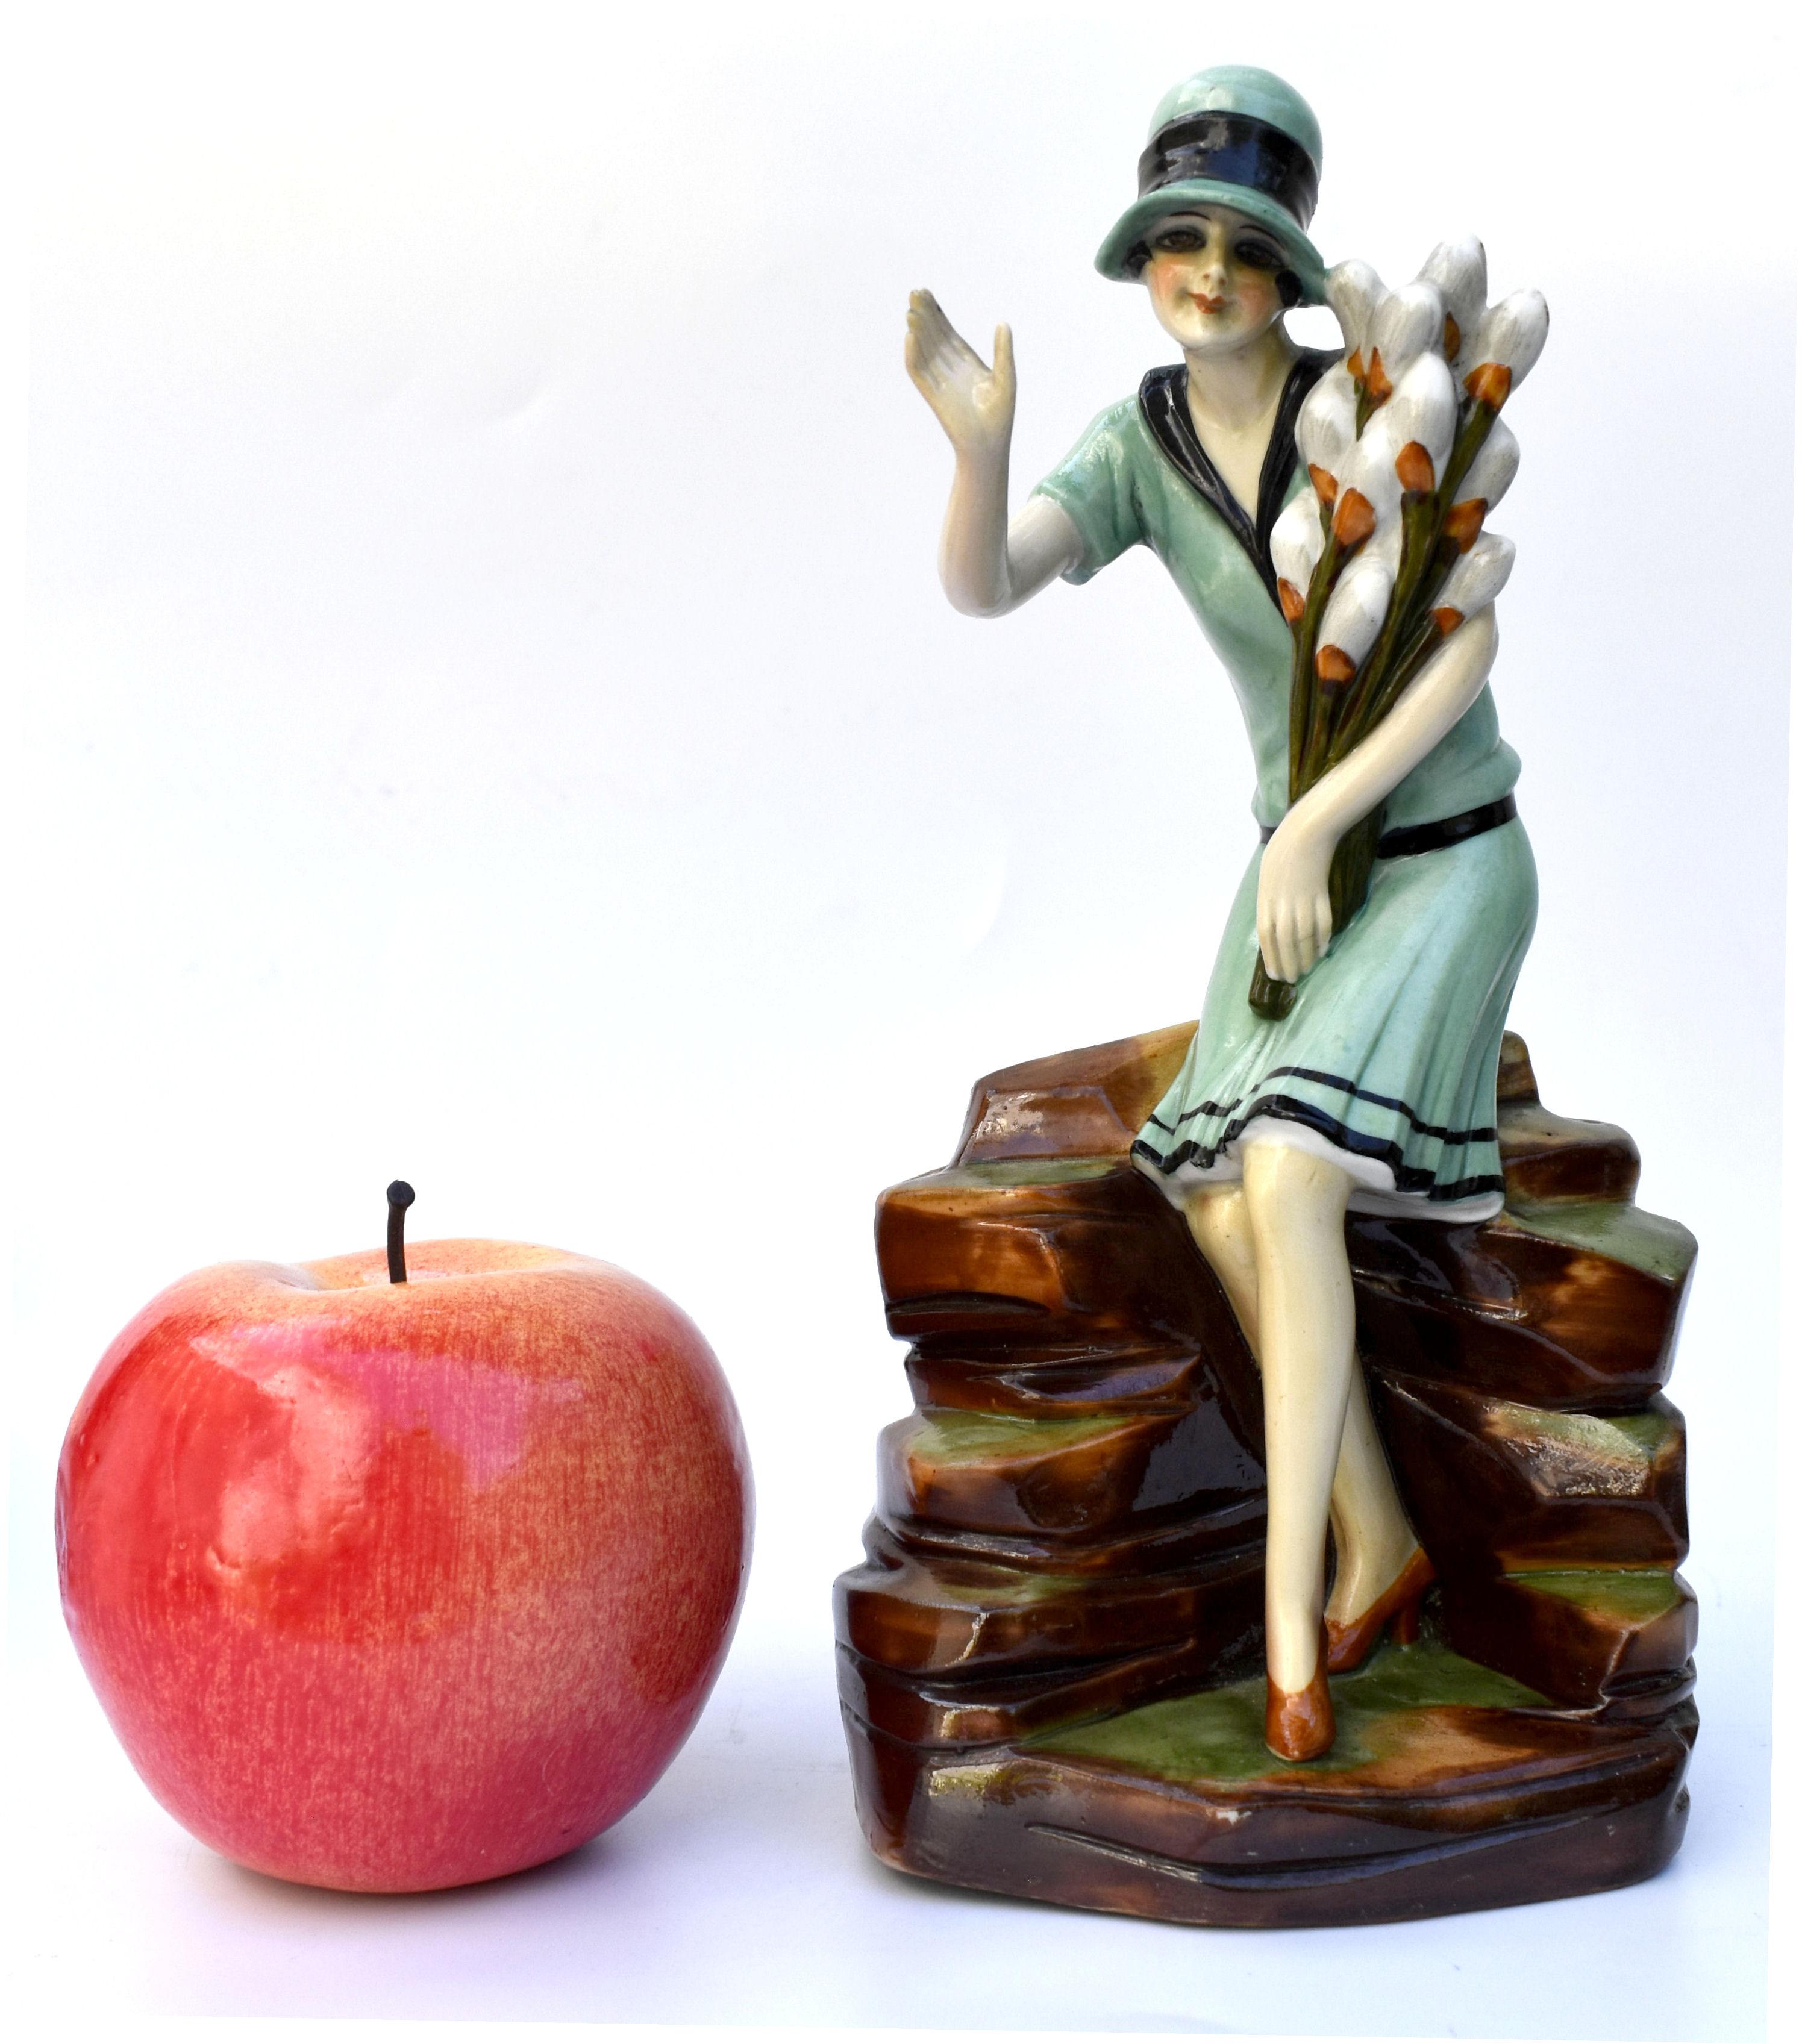 Dating to the 1930's this very attractive and rare Art Deco hat pin holder is made by FASOLD & STAUCH more commonly known for making half dolls and is a German company. Rare and in excellent condition, I couldn't find any flaws to note, she's free